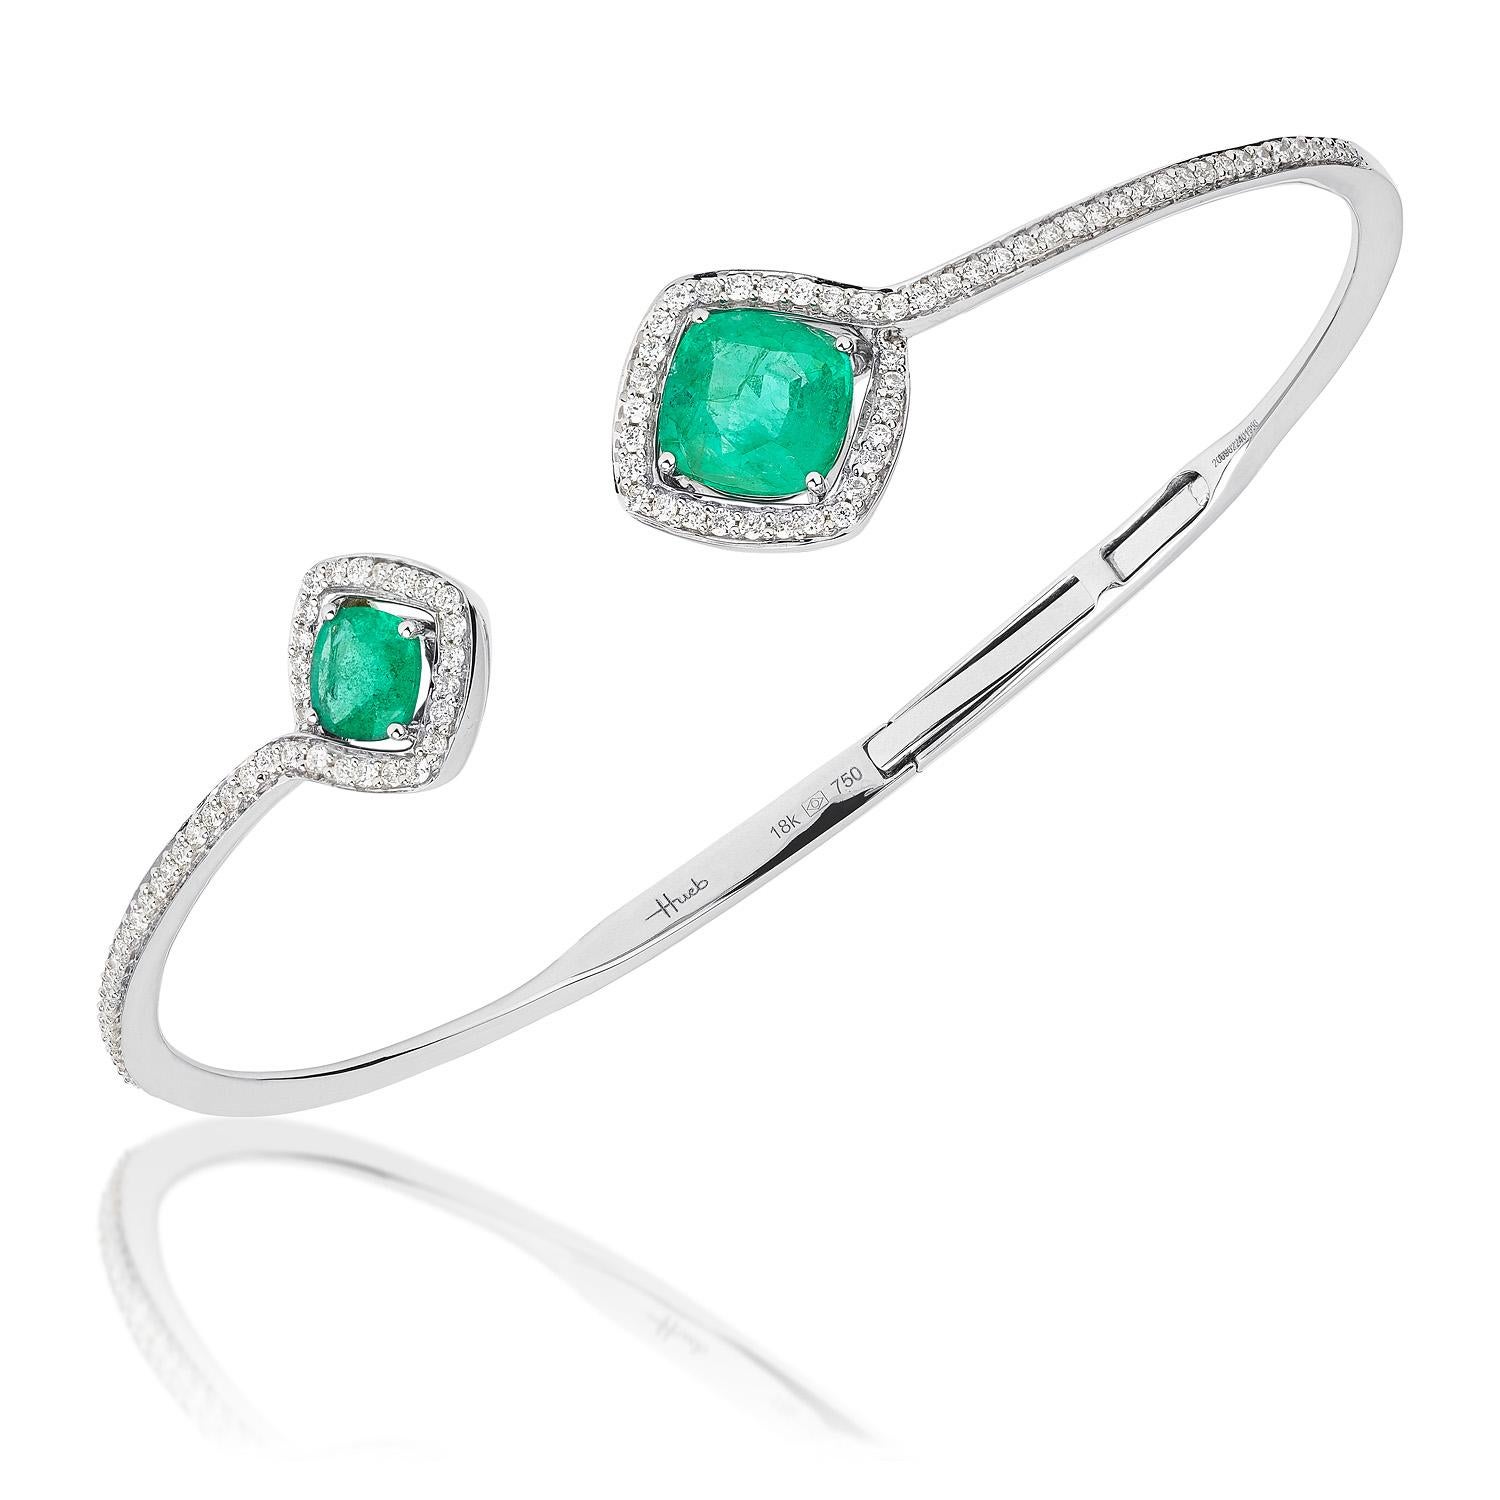 Contemporary 18 Karat Spectrum White Gold Bracelet/Bangle with Vs-Gh Diamonds and Green For Sale